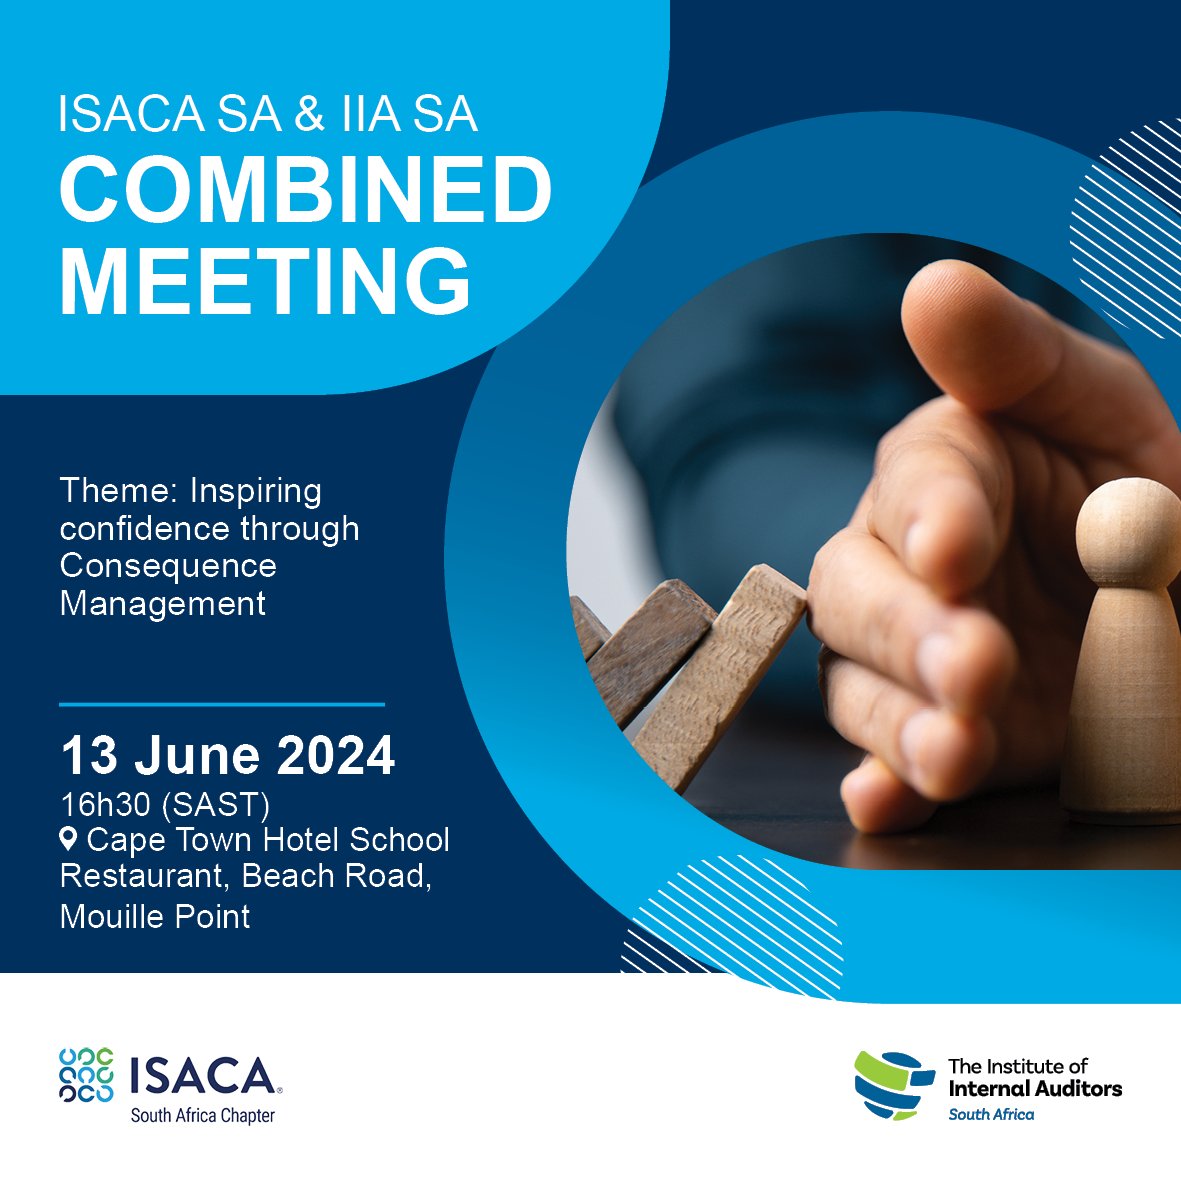 Join us for an inspiring collaboration between ISACA SA & IIA SA!  

13 June 2024, 16h30, Cape Town Hotel School Restaurant, Mouille Point. 

See you there! 

#inspireconfidence #isacasa #iiasa